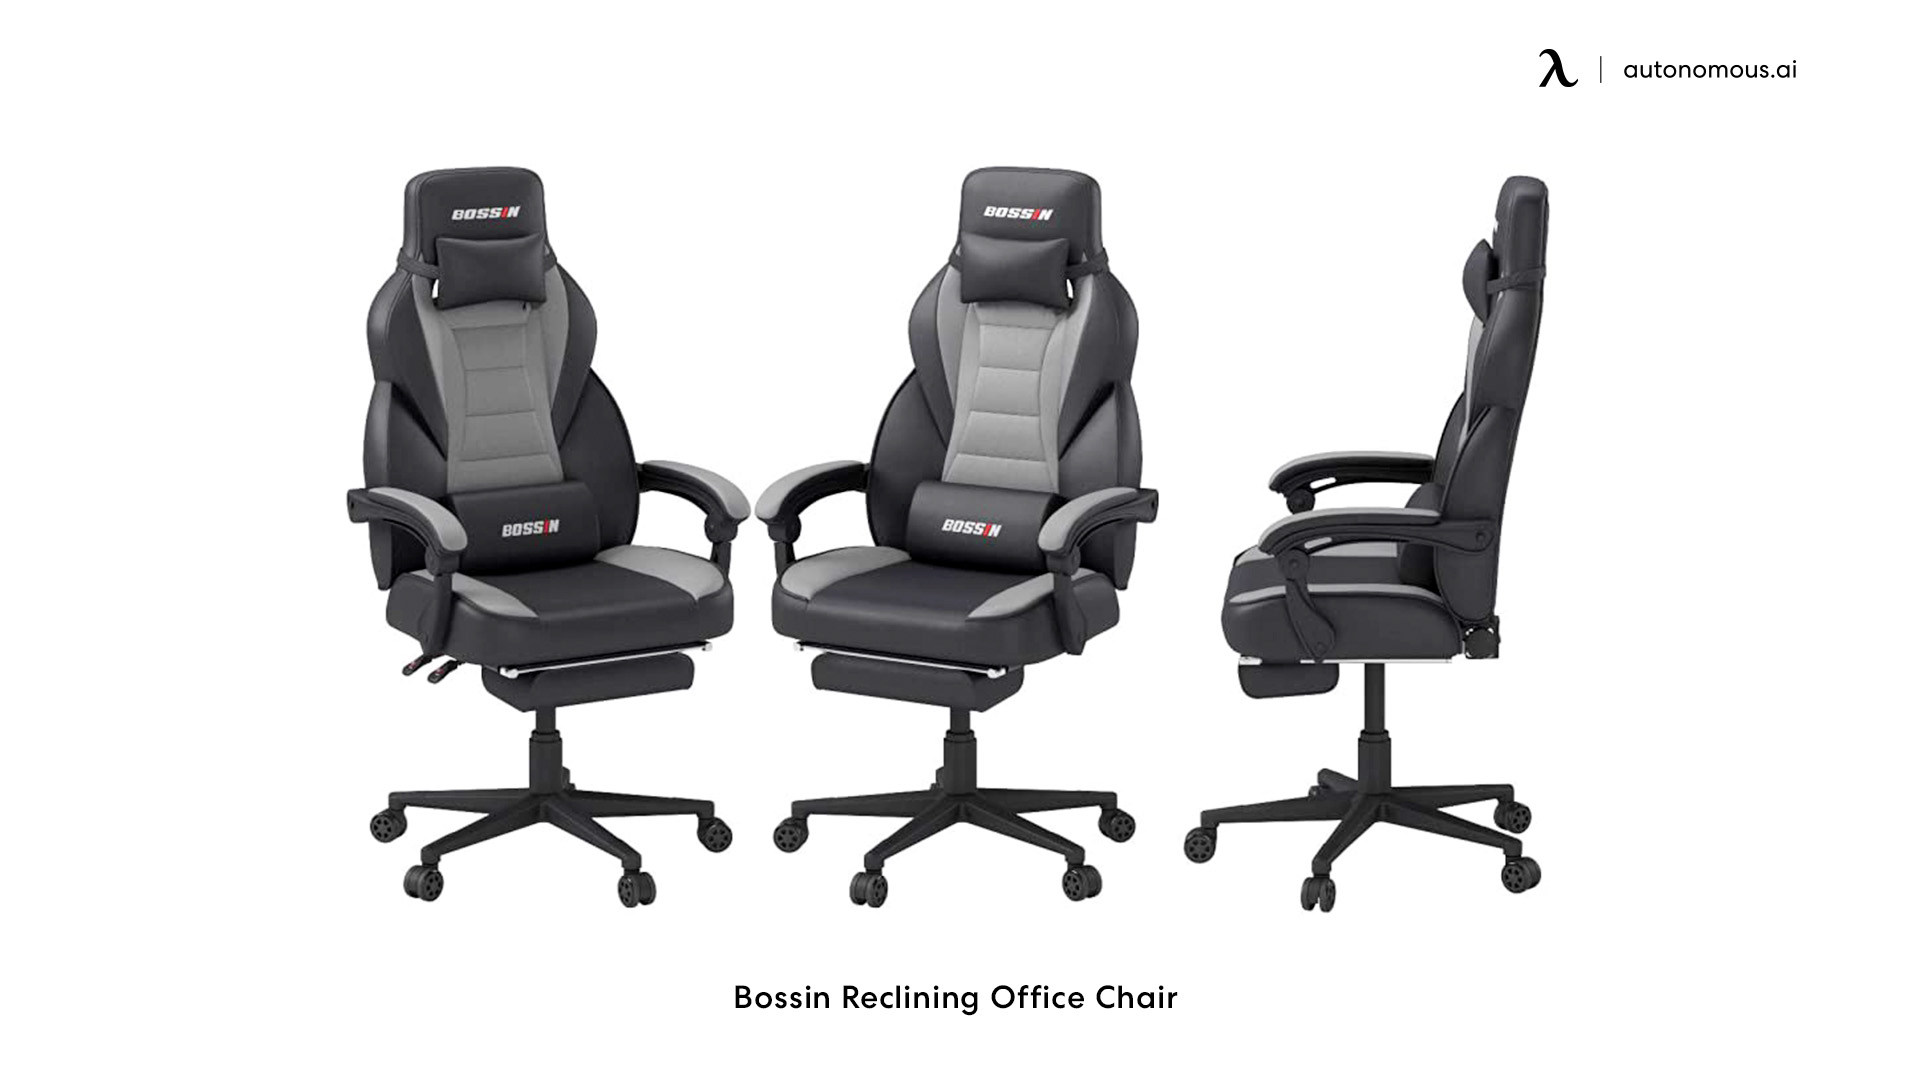 Bossin Office Chair With Leg Rest Features